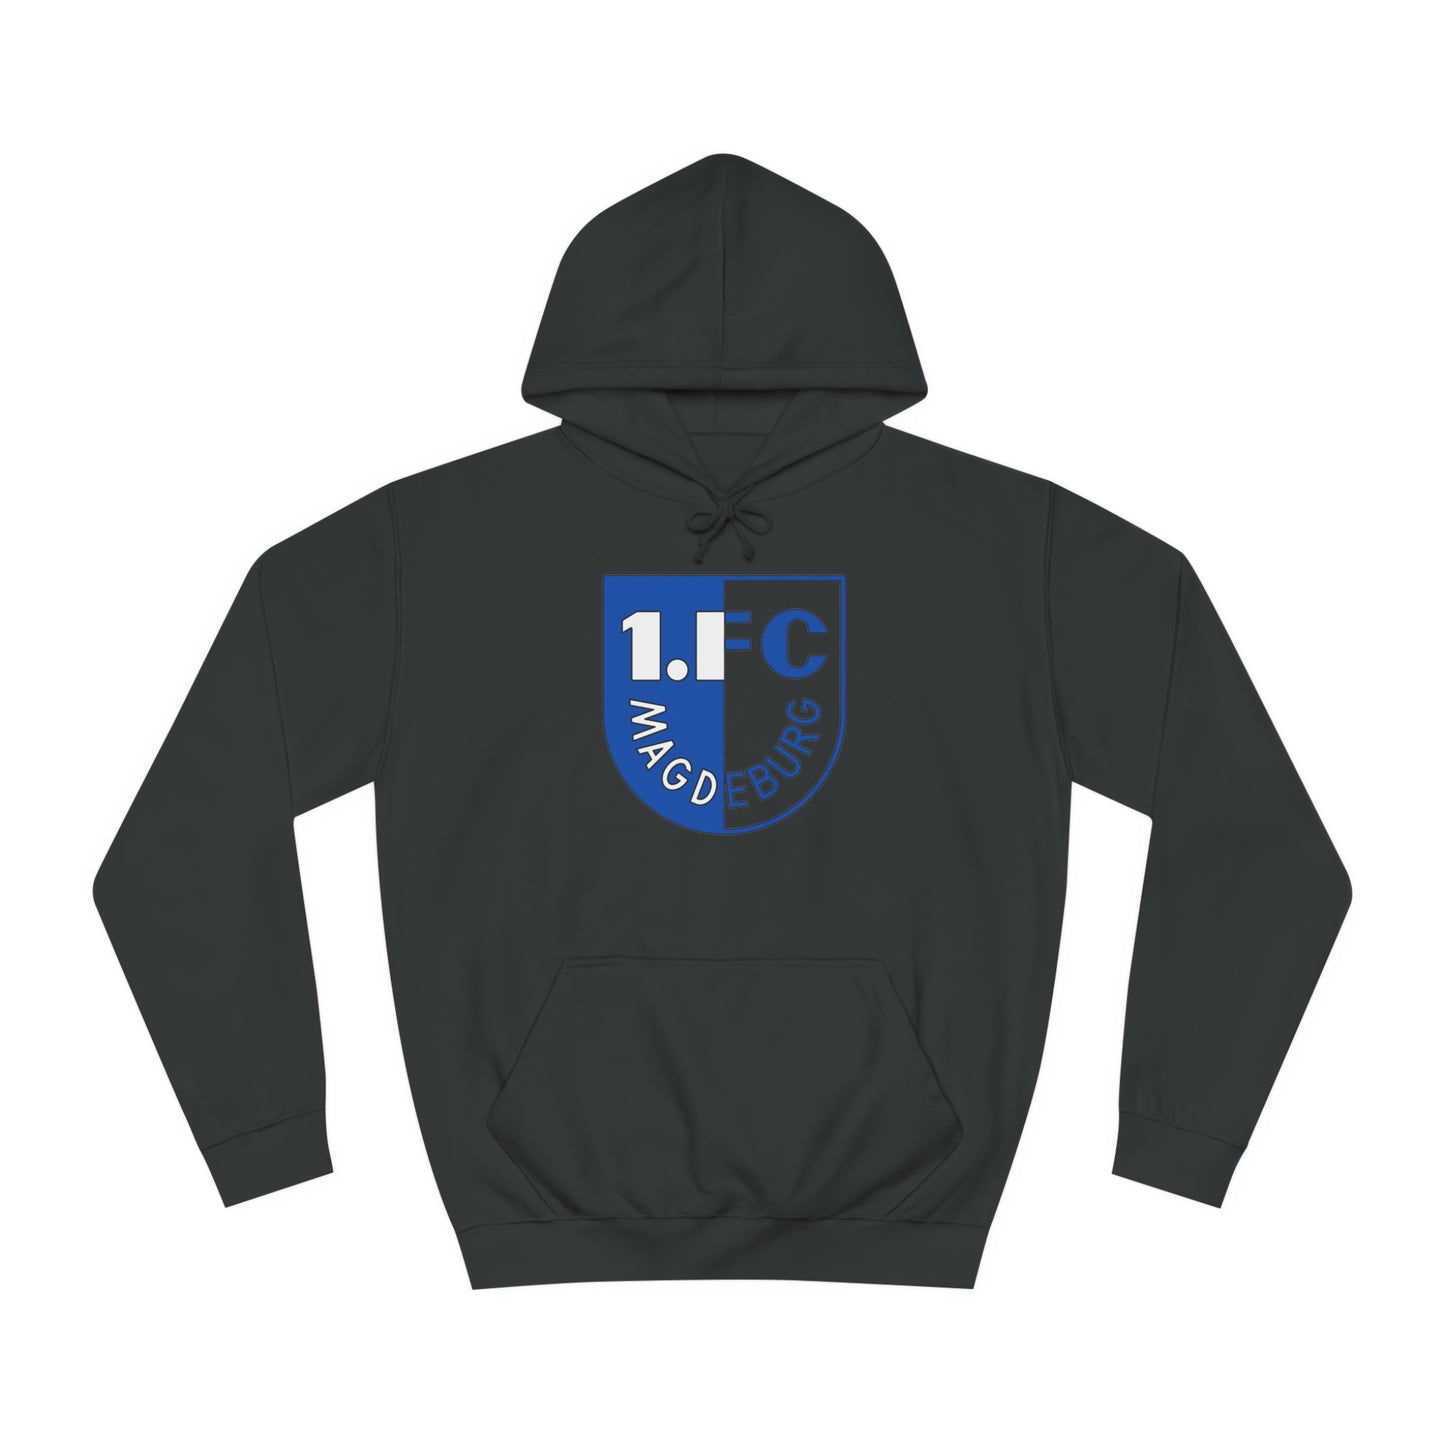 1 FC Magdeburg (1970's logo) Unisex Heavy Blend Pullover Hoodie